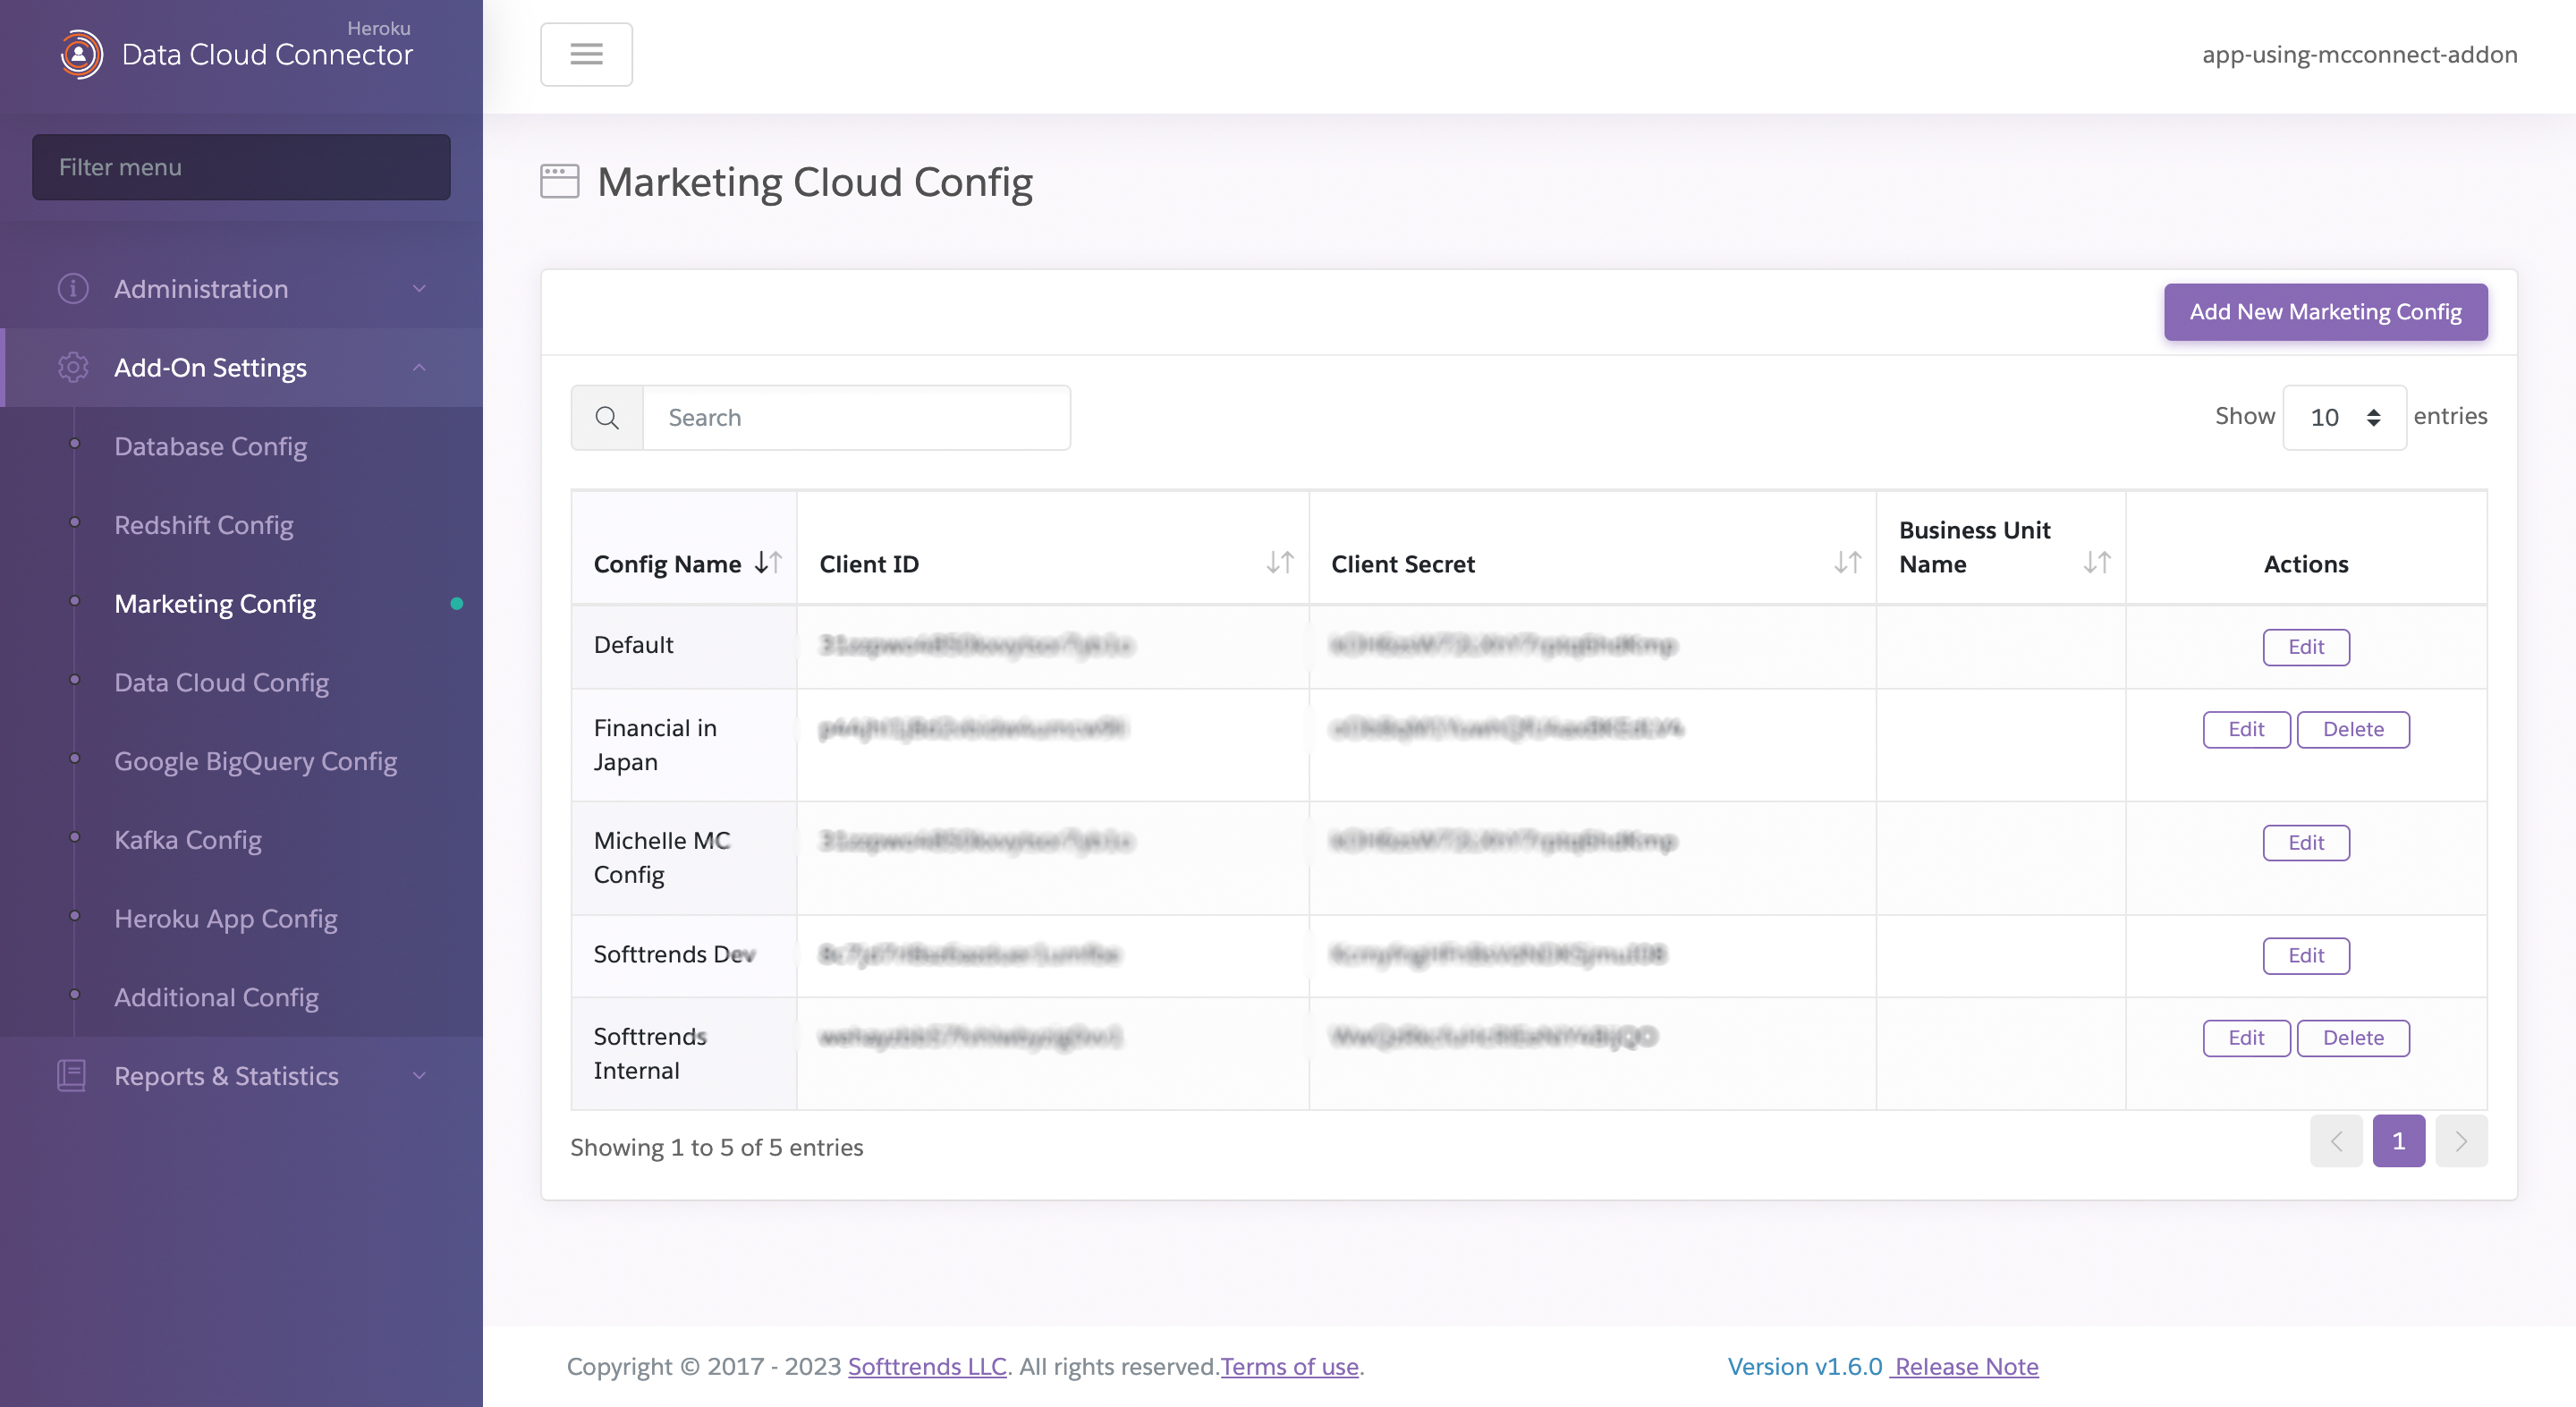 A screenshot of the Marketing Cloud Configuration page showing a list of configurations with the option to add additional configurations.